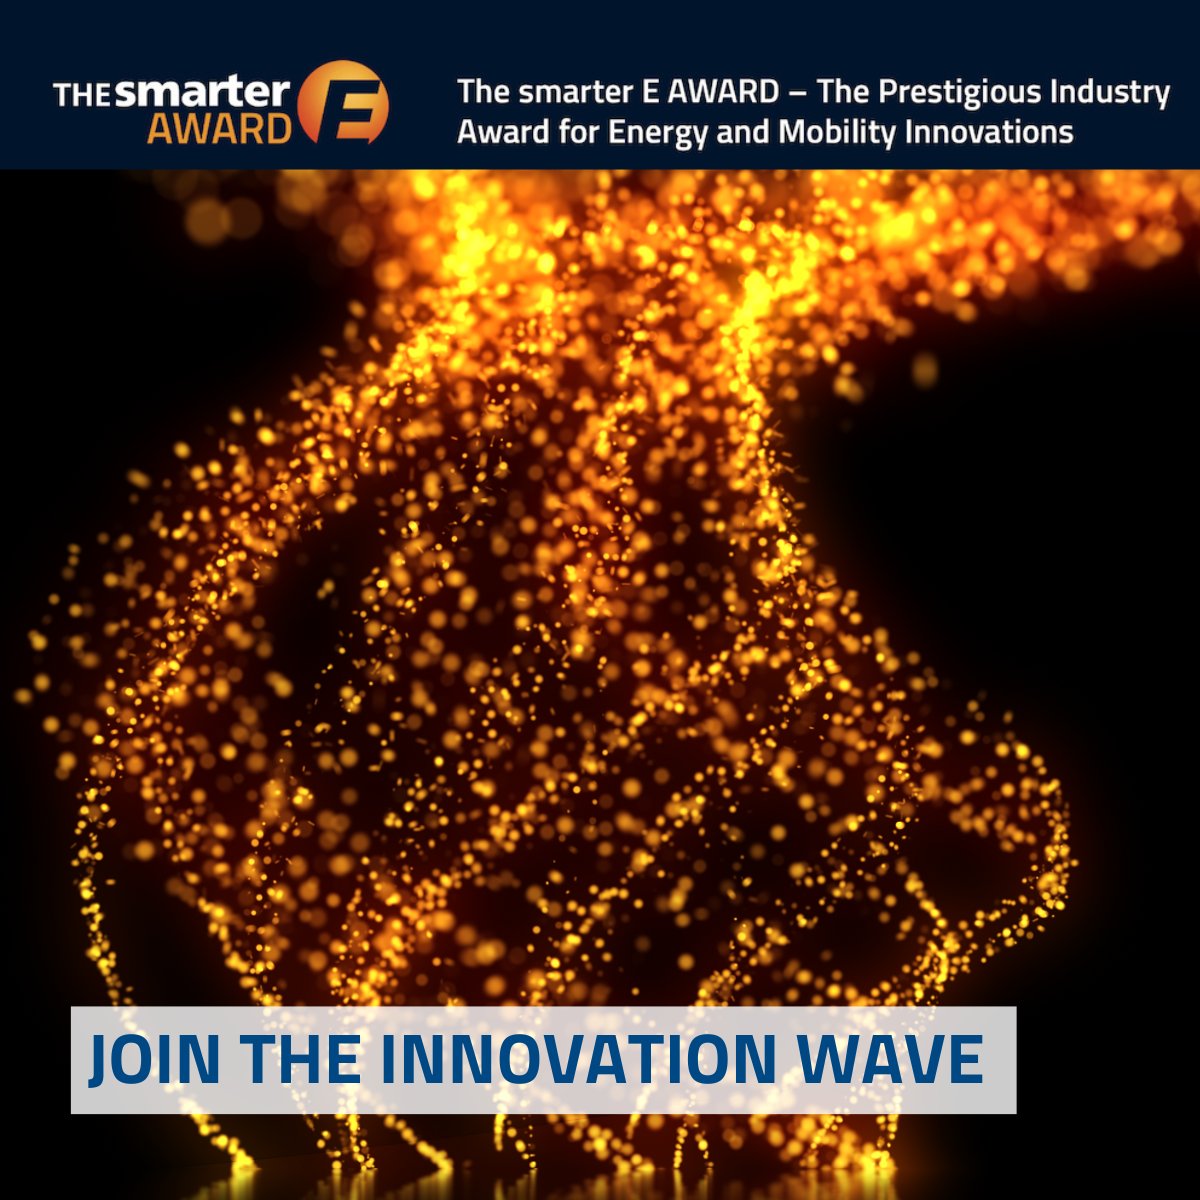 Who's eligible to take part in #TheSmarterEAWARD? The answer: YOU! Applications are OPEN to exhibitors worldwide from #Intersolar, #eesEvents, #Power2Drive, and #EMPower exhibitions. 𝗔𝗽𝗽𝗹𝘆 𝘁𝗼𝗱𝗮𝘆: thesmartere-award.com